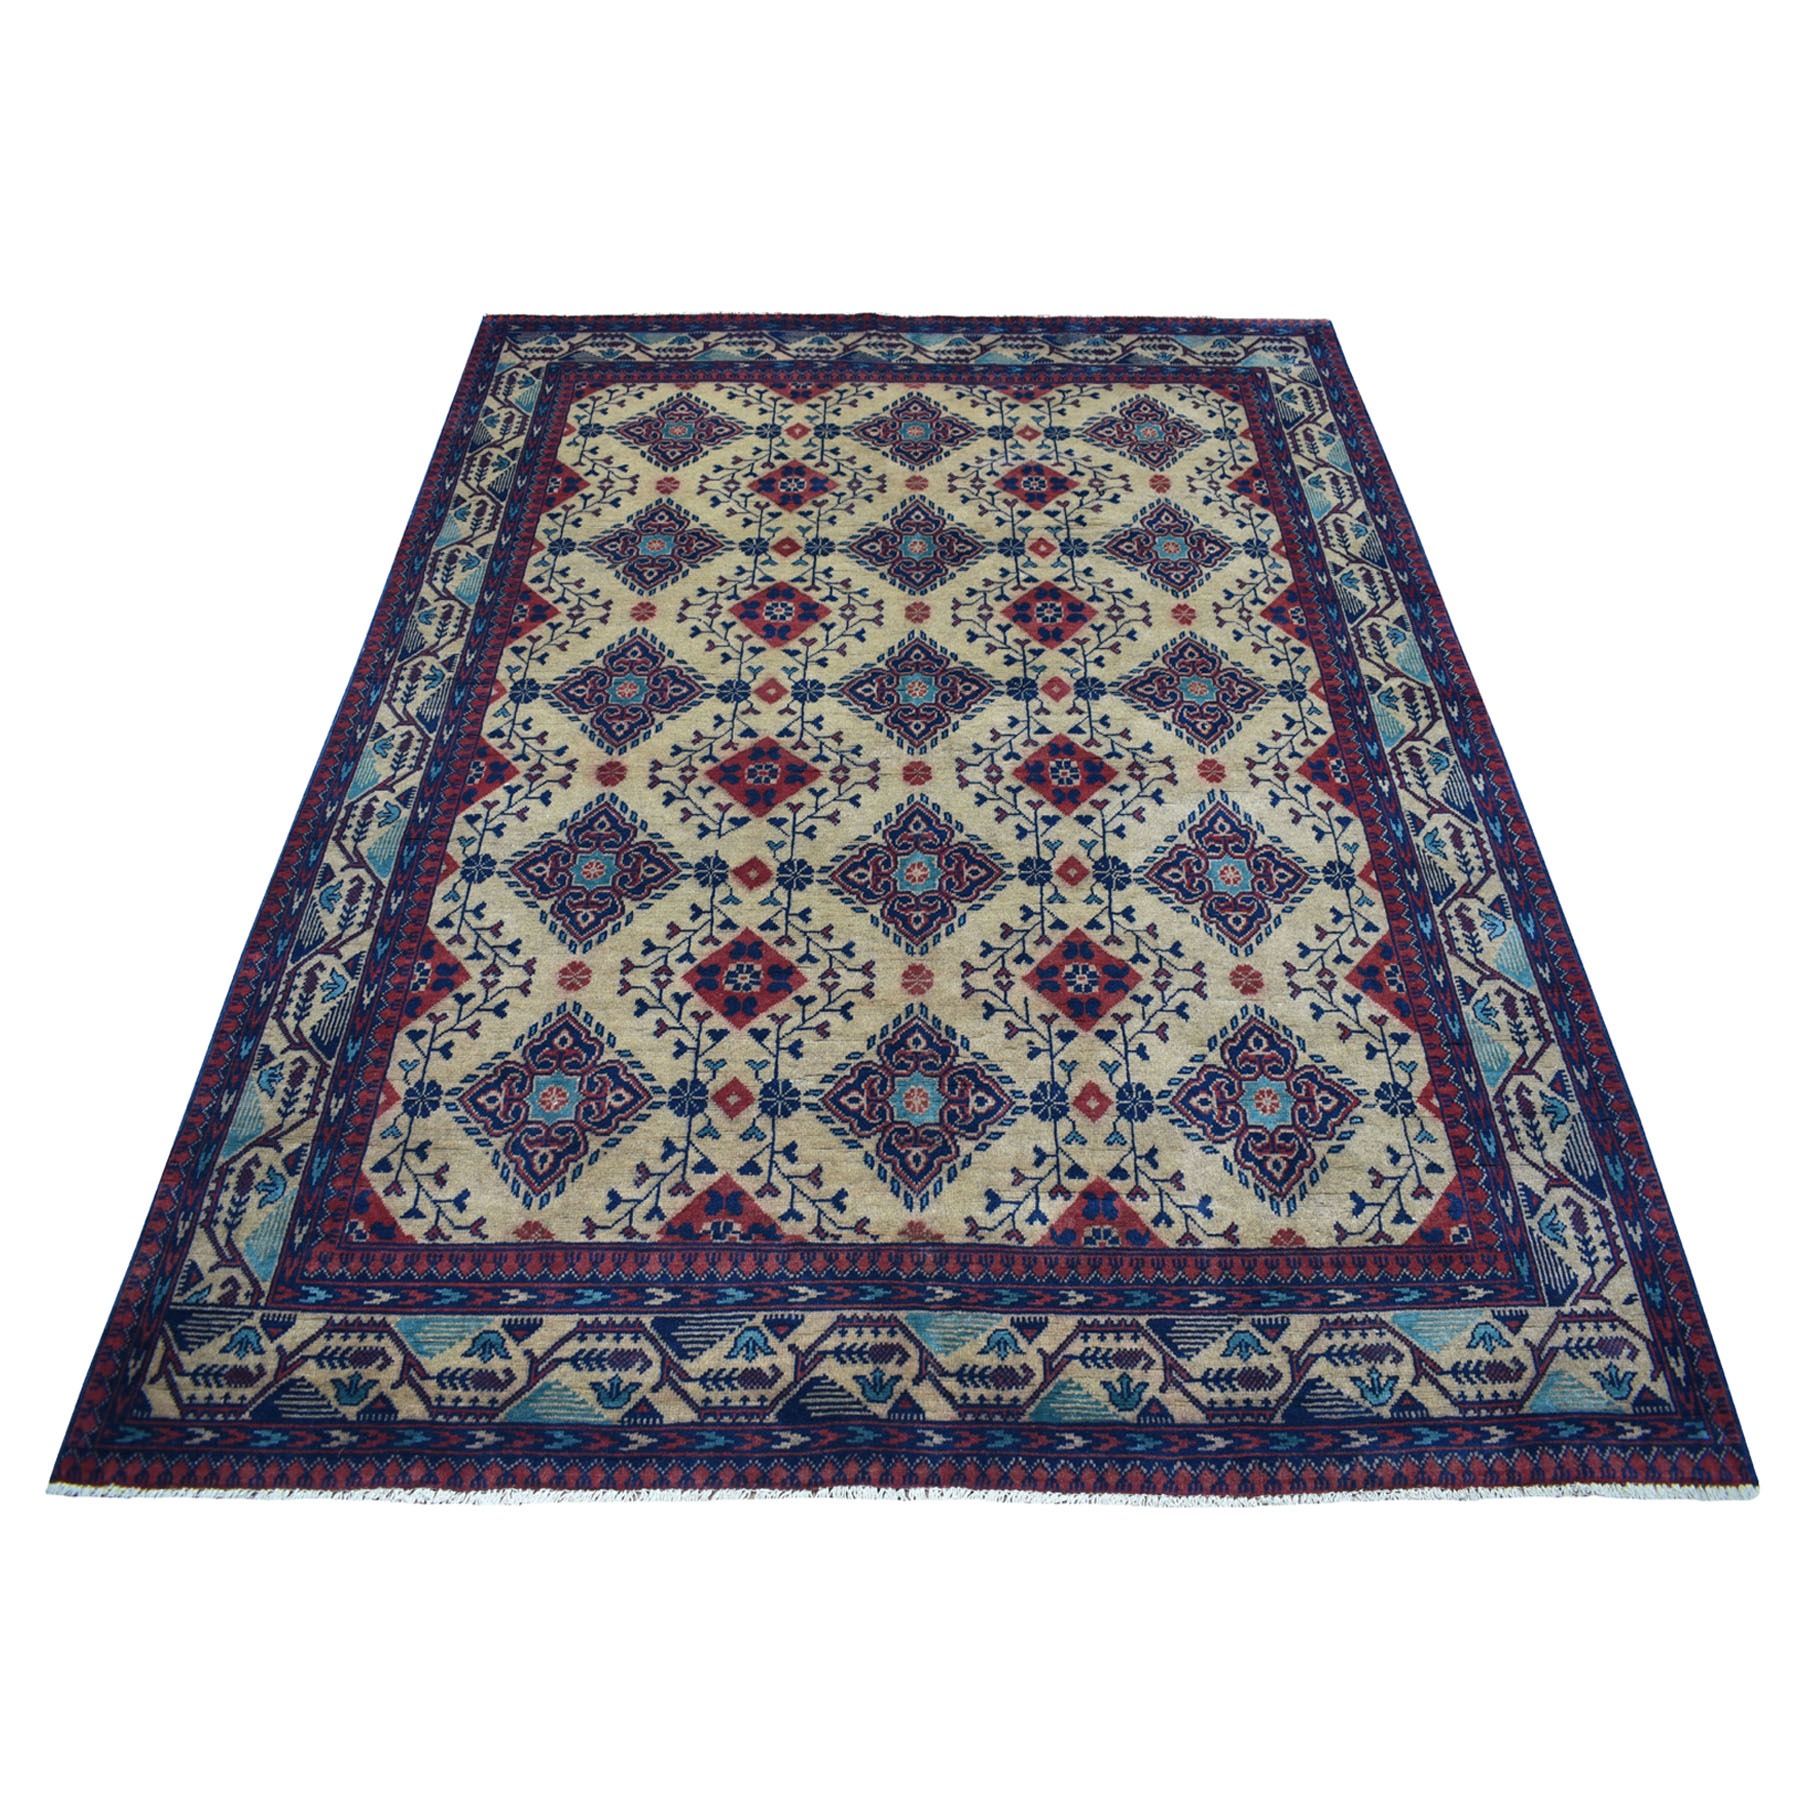 5'7"X7' Vintage Look Geometric Afghan Andkhoy Pure Wool Hand Knotted Oriental Rug moaecc96